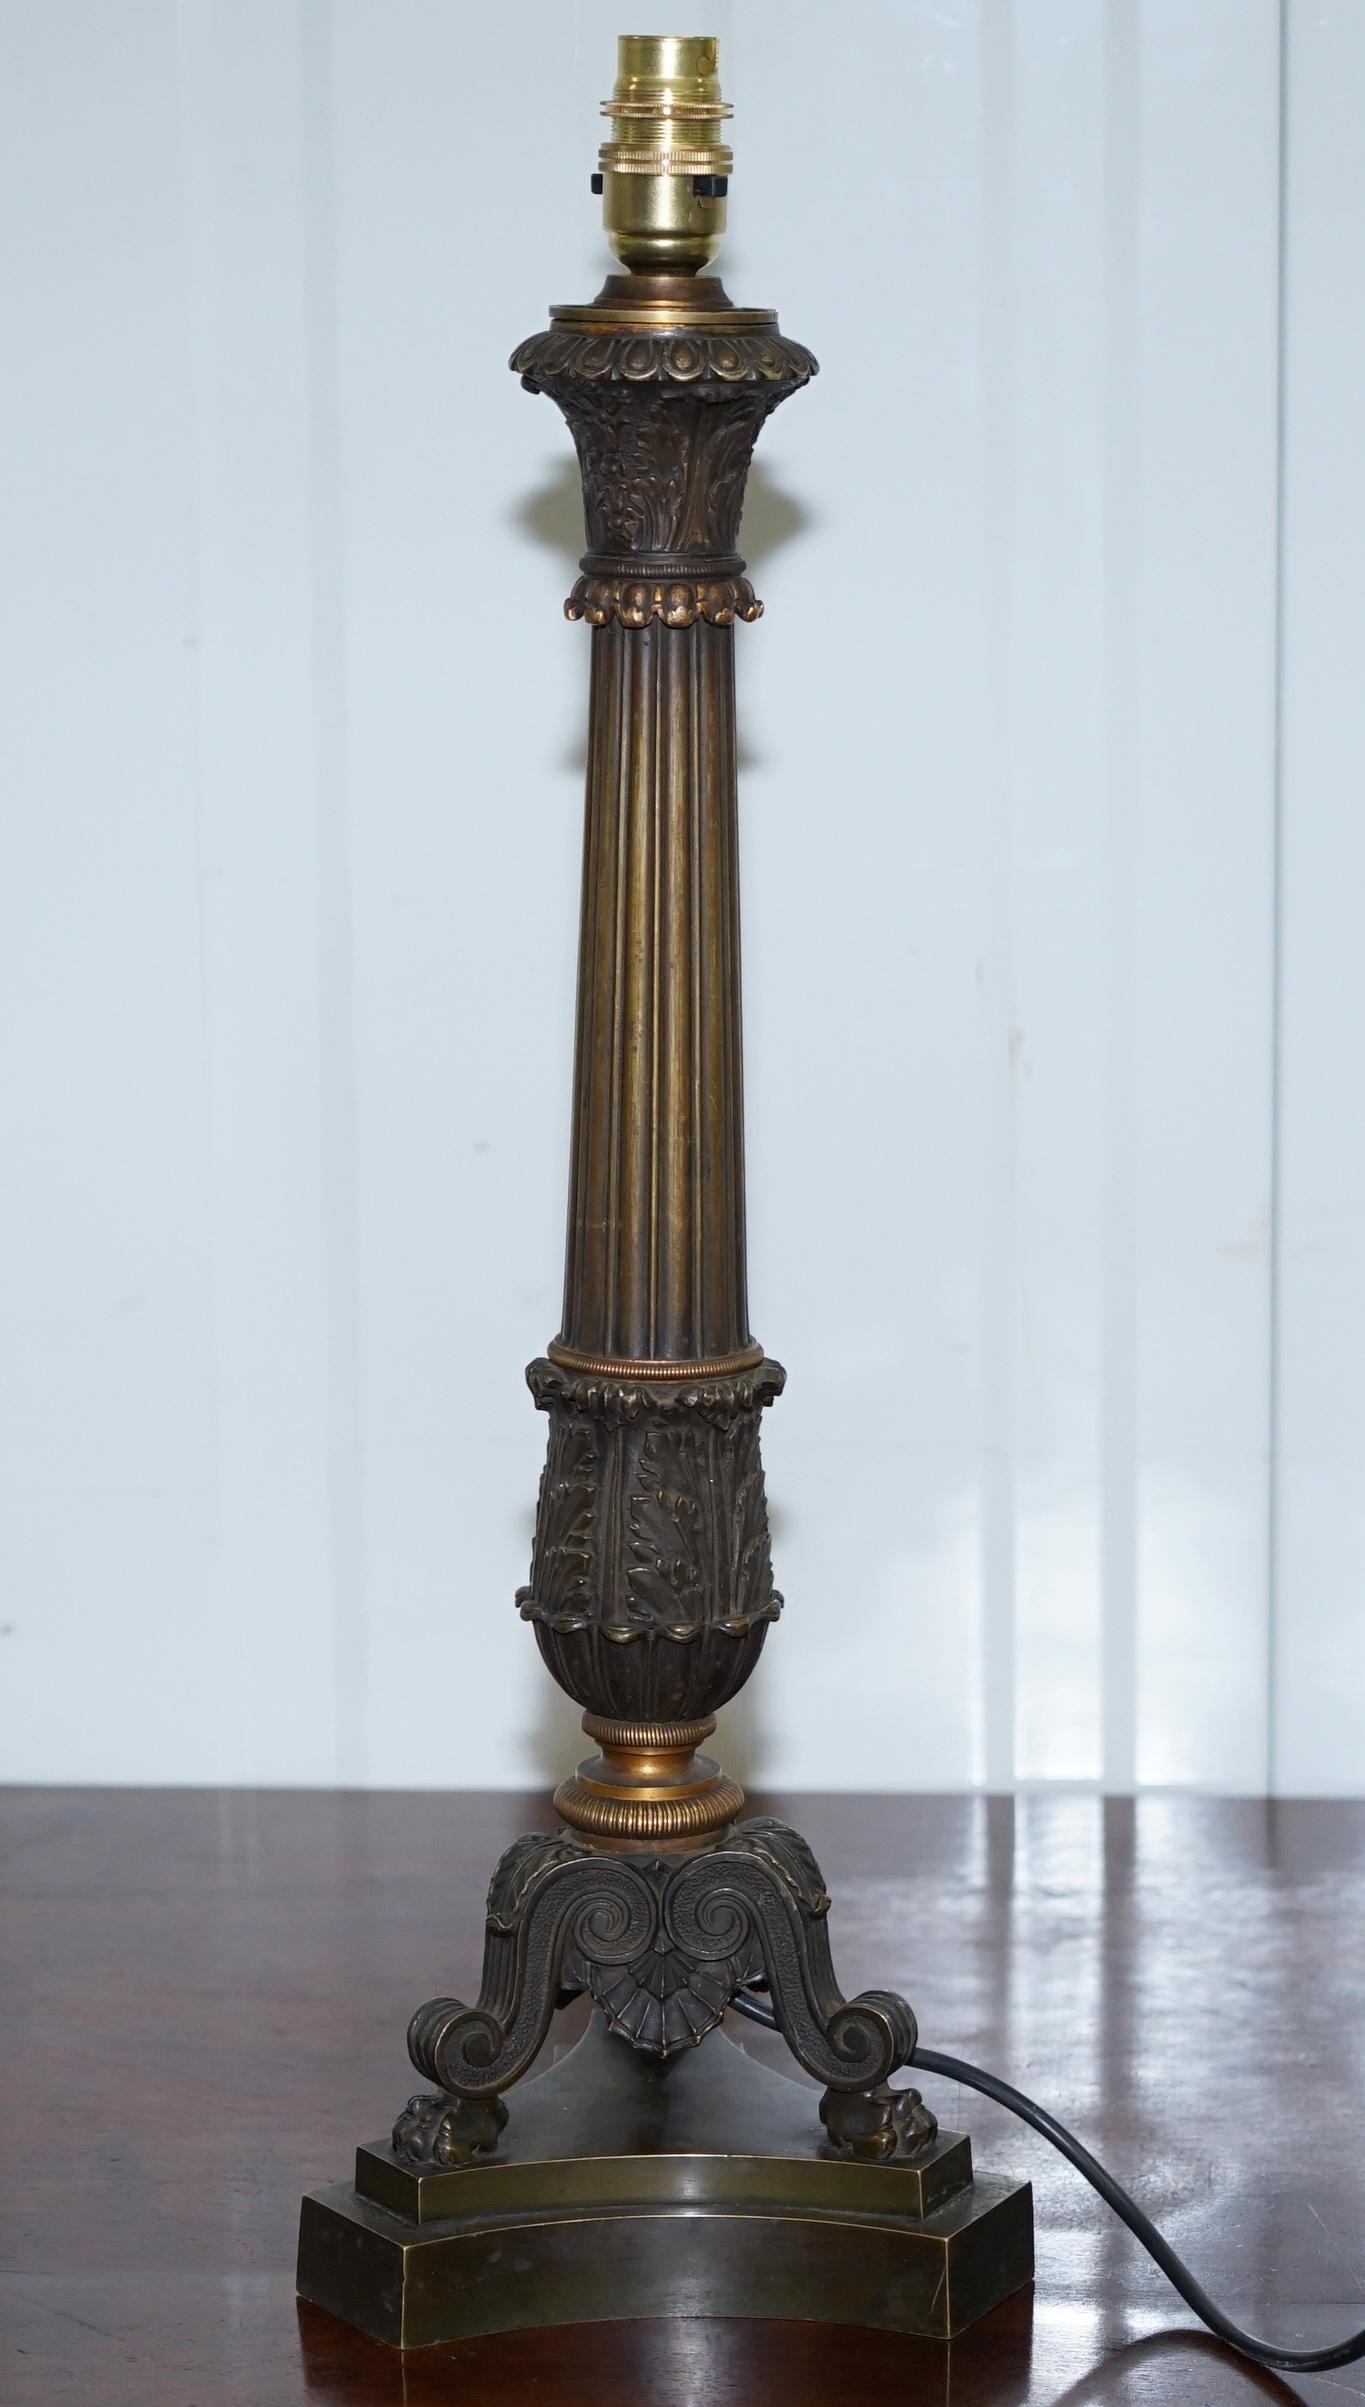 We are delighted to offer for sale this very rare large solid bronze Corinthian pillar table lamp with Lion hairy paw feet

A stunning piece, it adds style charm and charisma to any setting

The lamp has been fully restored to include a new